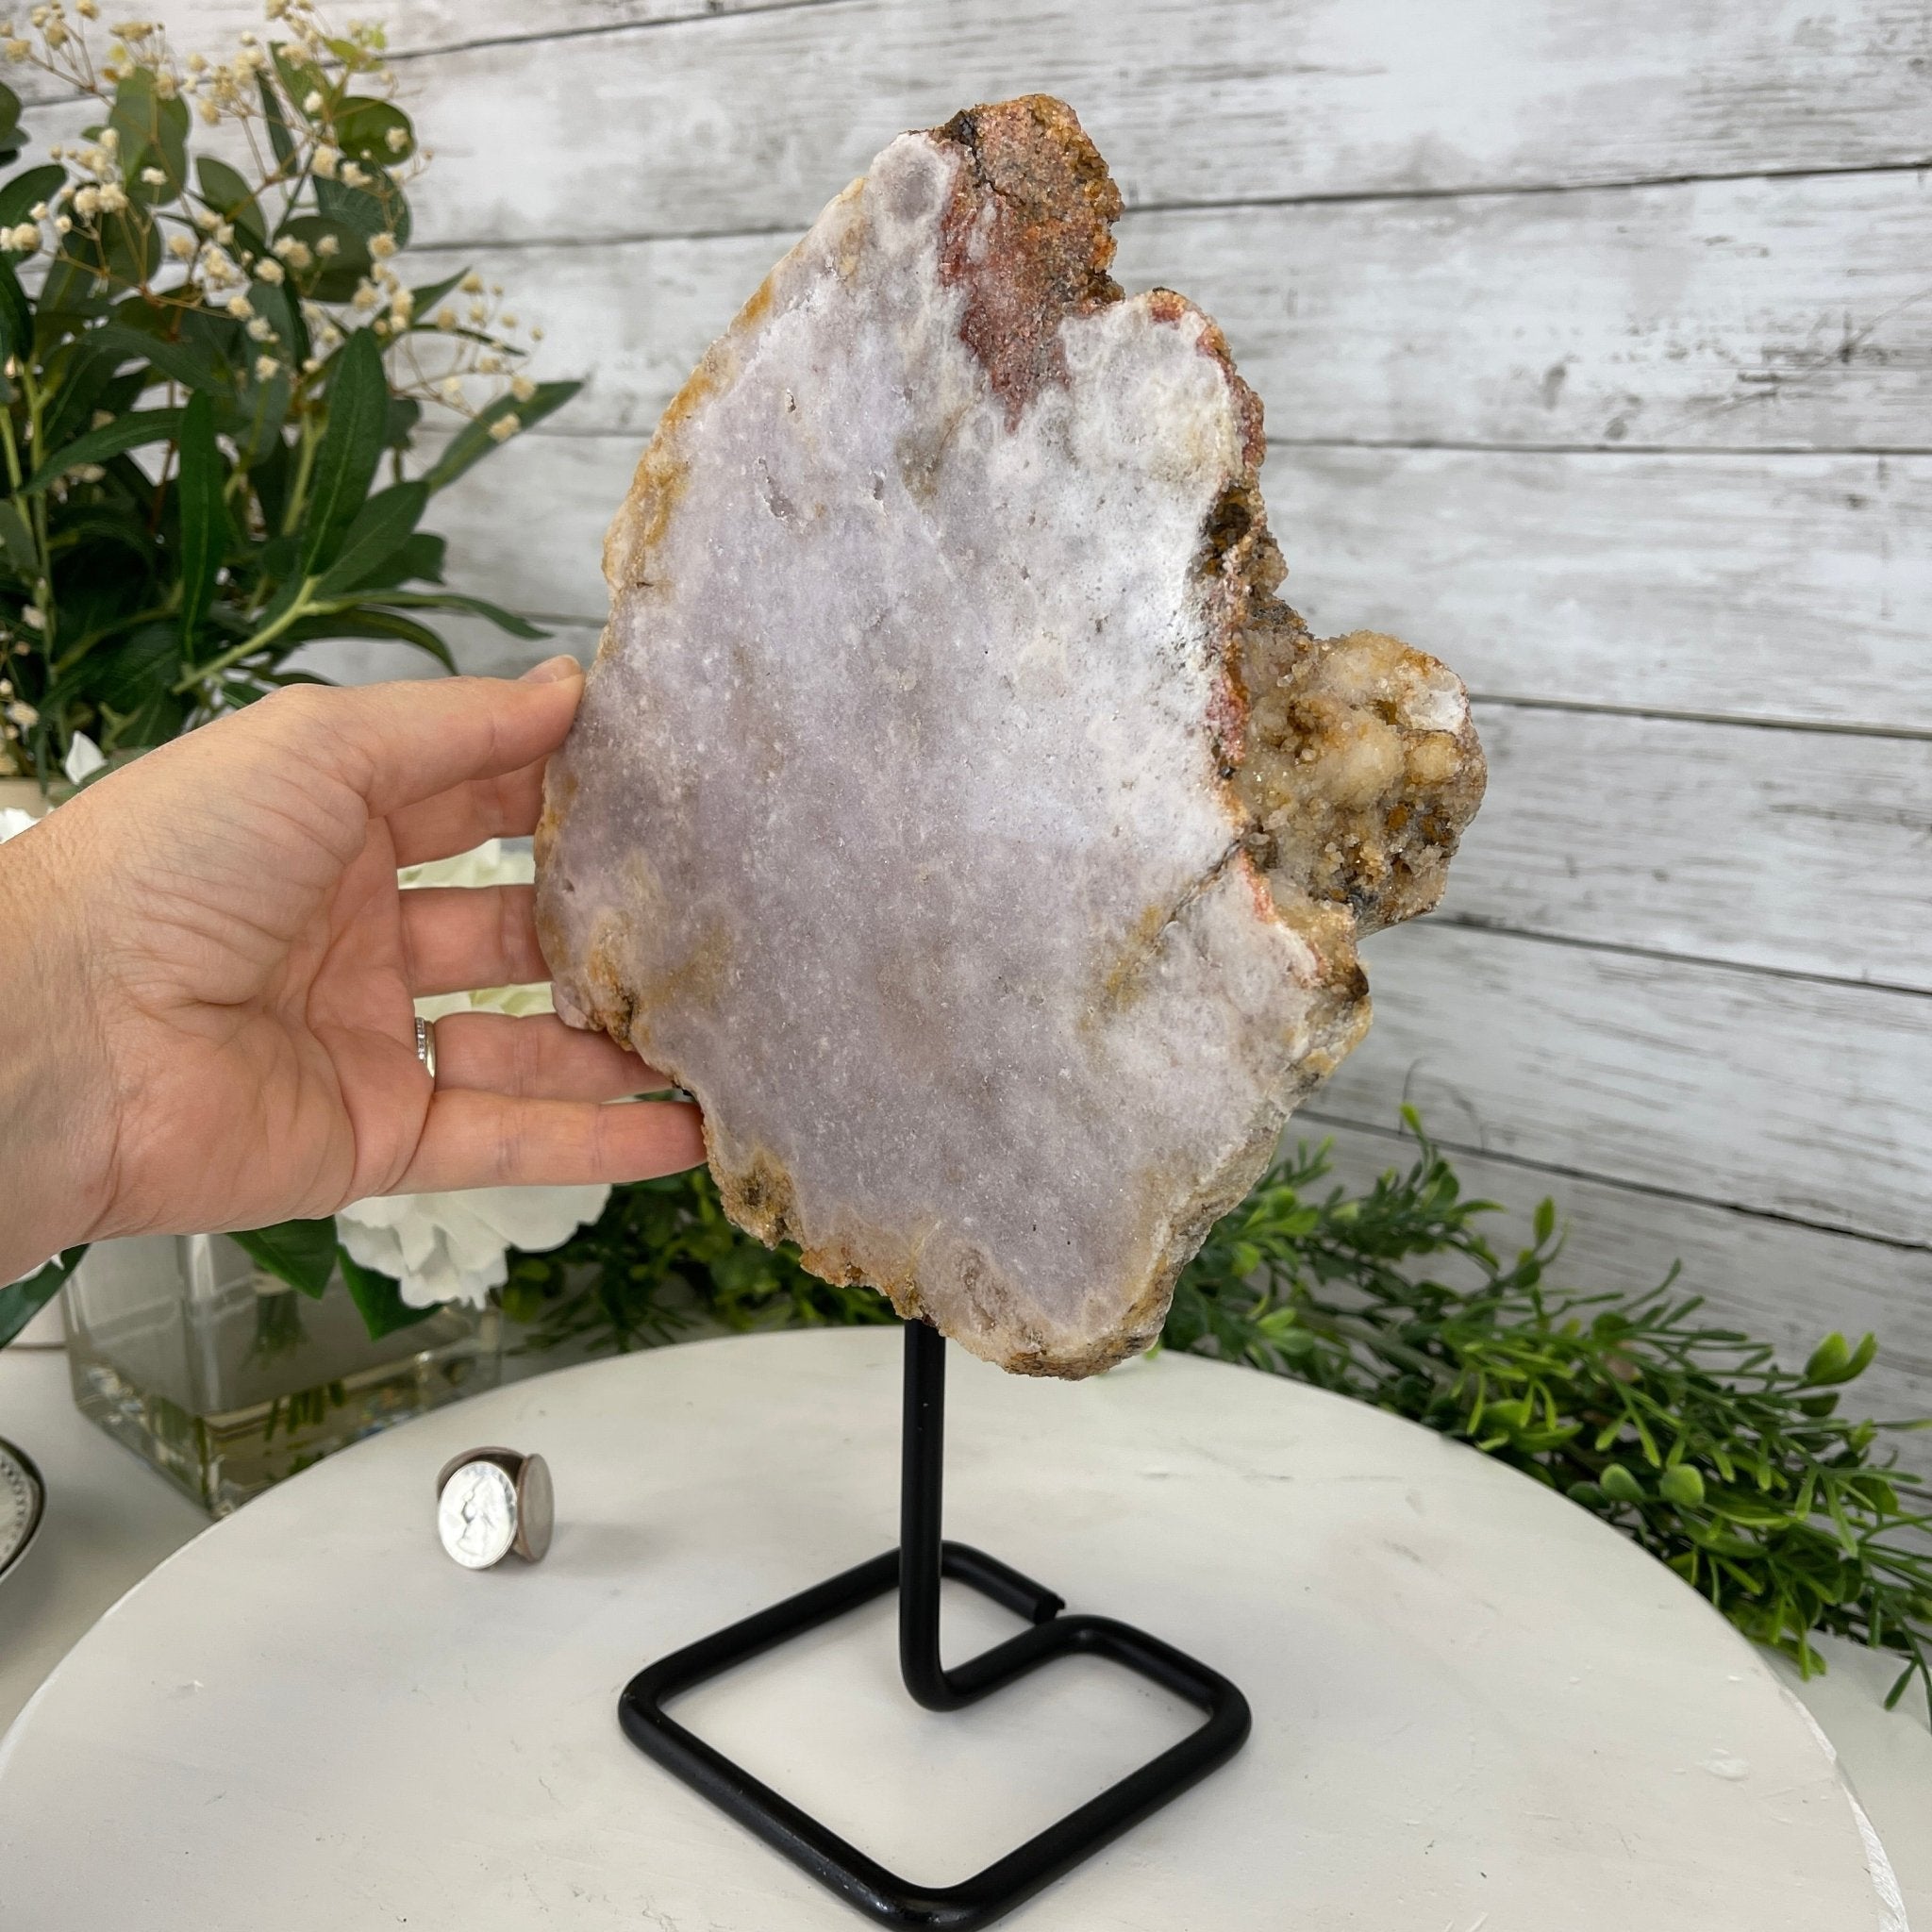 Pink Amethyst Slice on a Stand, 5.9 lbs and 12" Tall #5742-0037 by Brazil Gems - Brazil GemsBrazil GemsPink Amethyst Slice on a Stand, 5.9 lbs and 12" Tall #5742-0037 by Brazil GemsSlices on Fixed Bases5742-0037